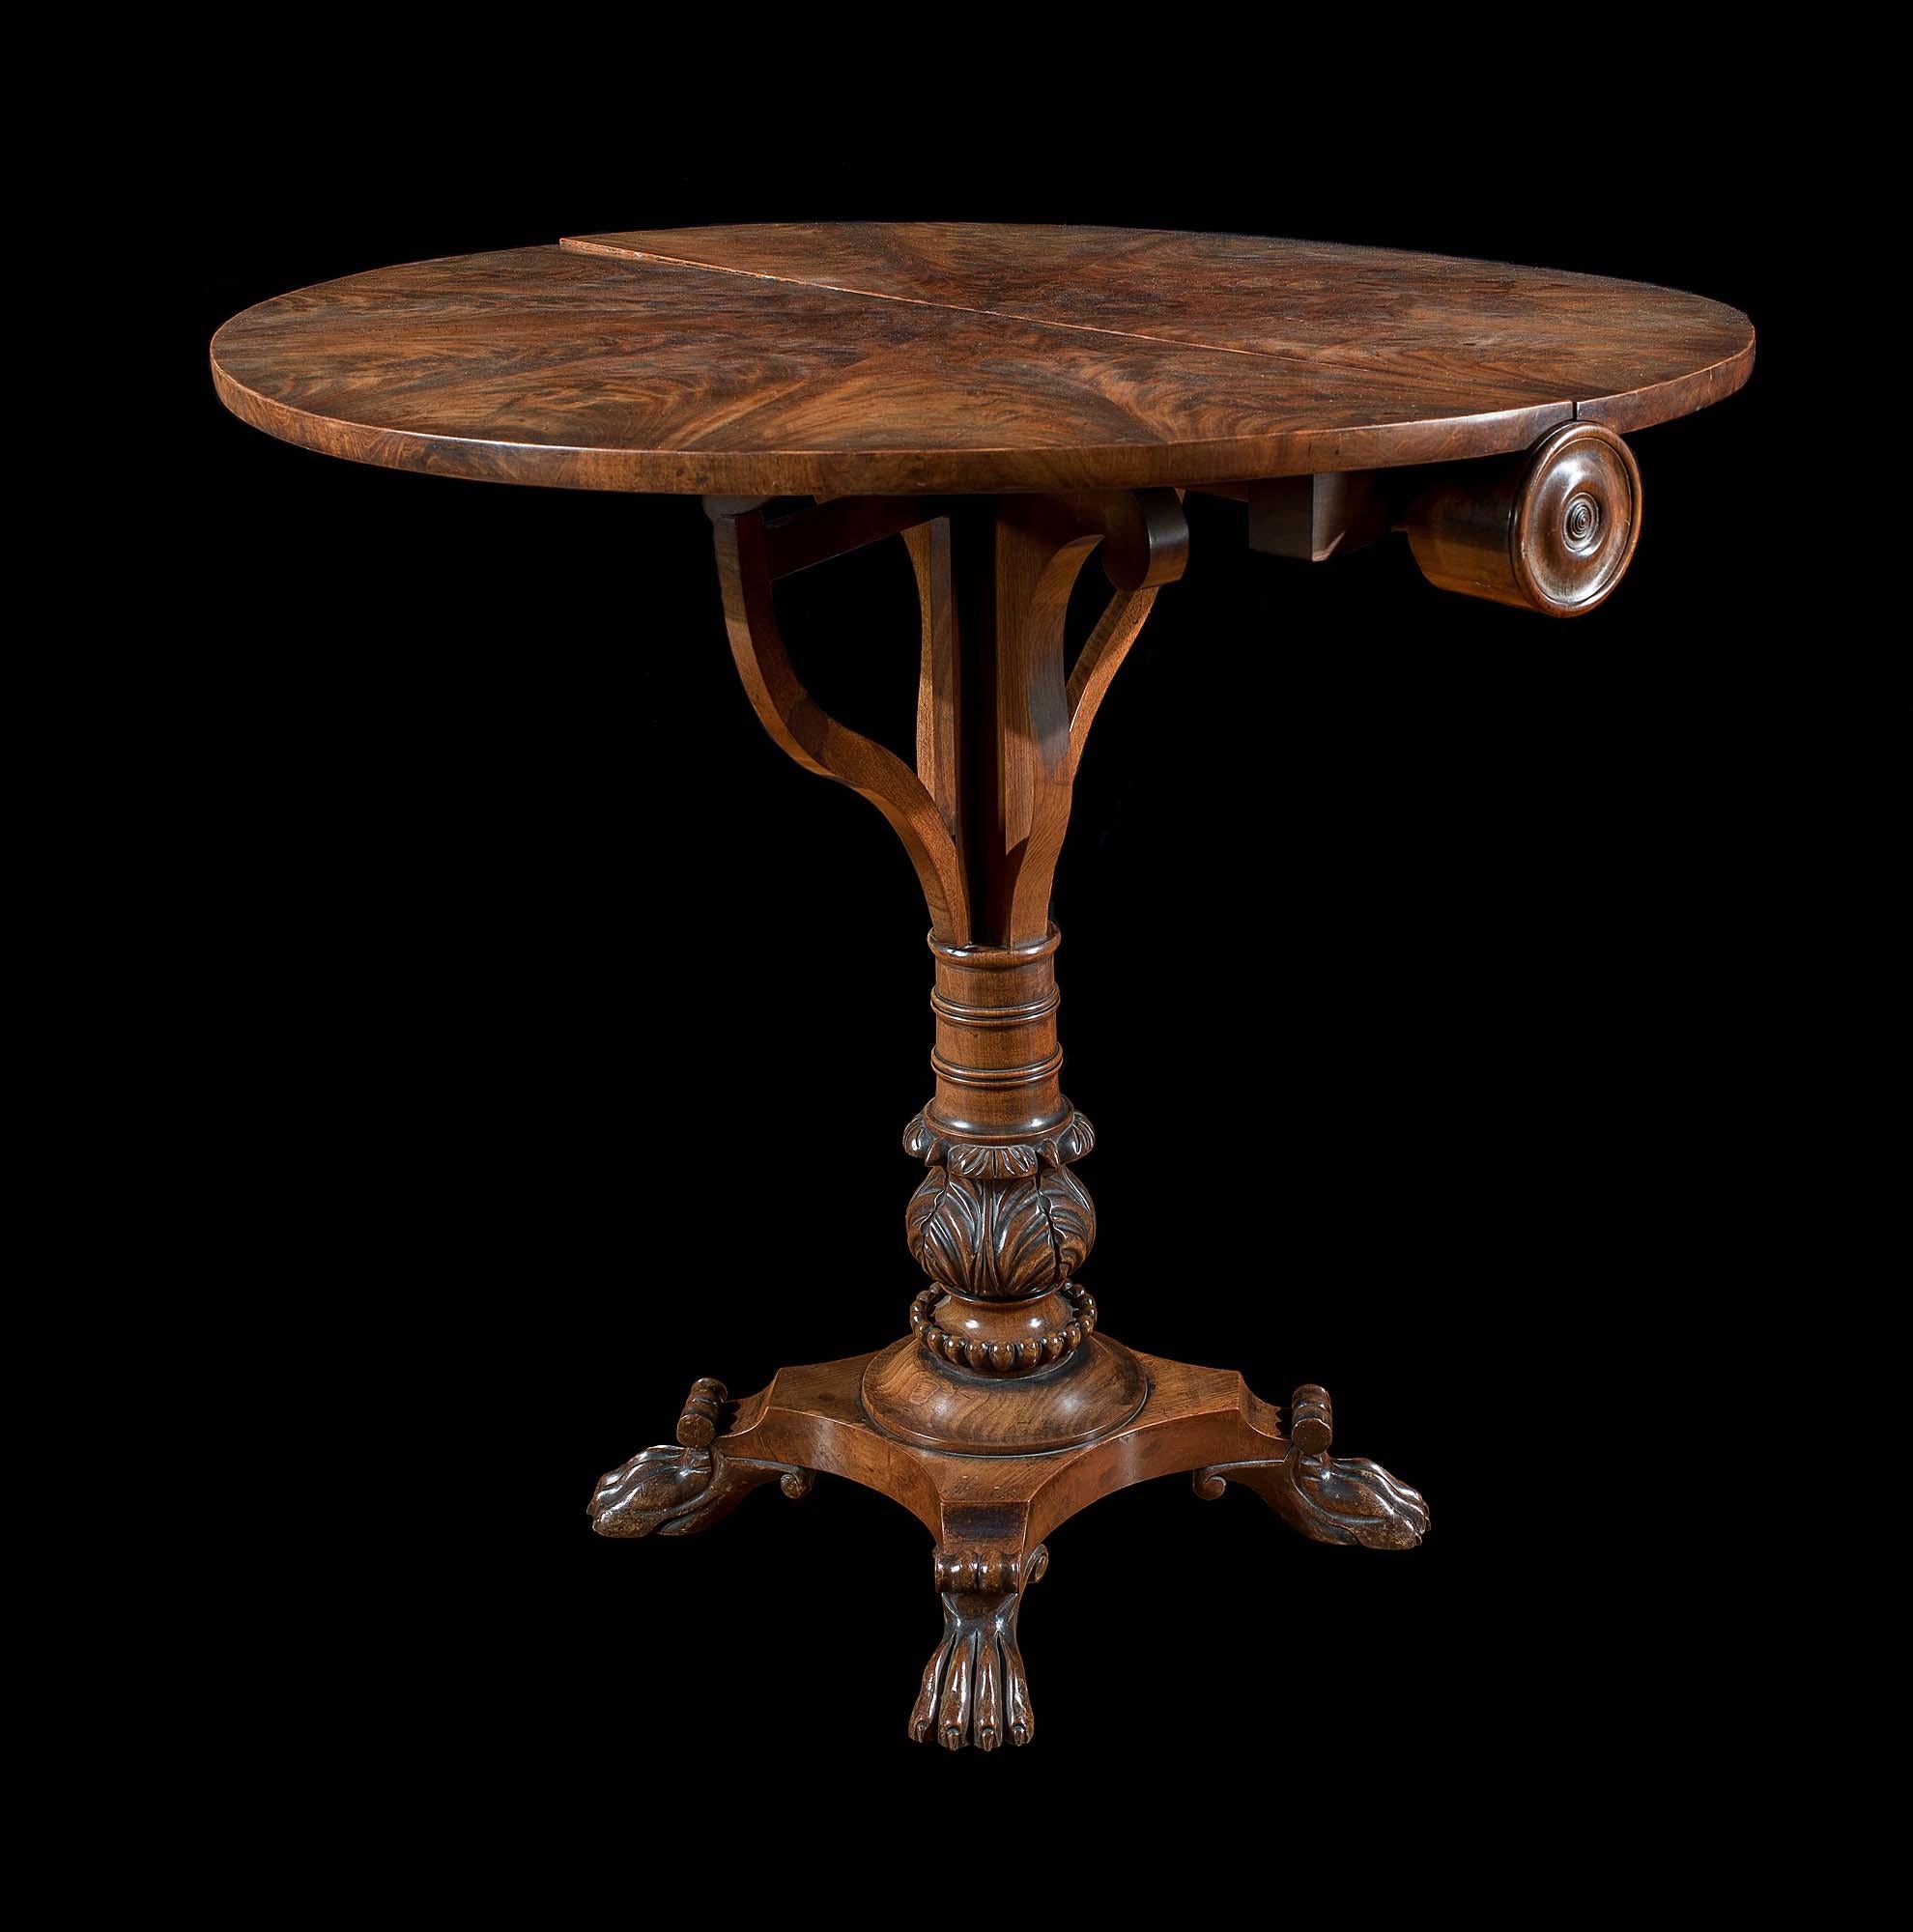 Regency Flame Mahogany Drop-Leaf Occasional Table im Zustand „Gut“ in London, GB